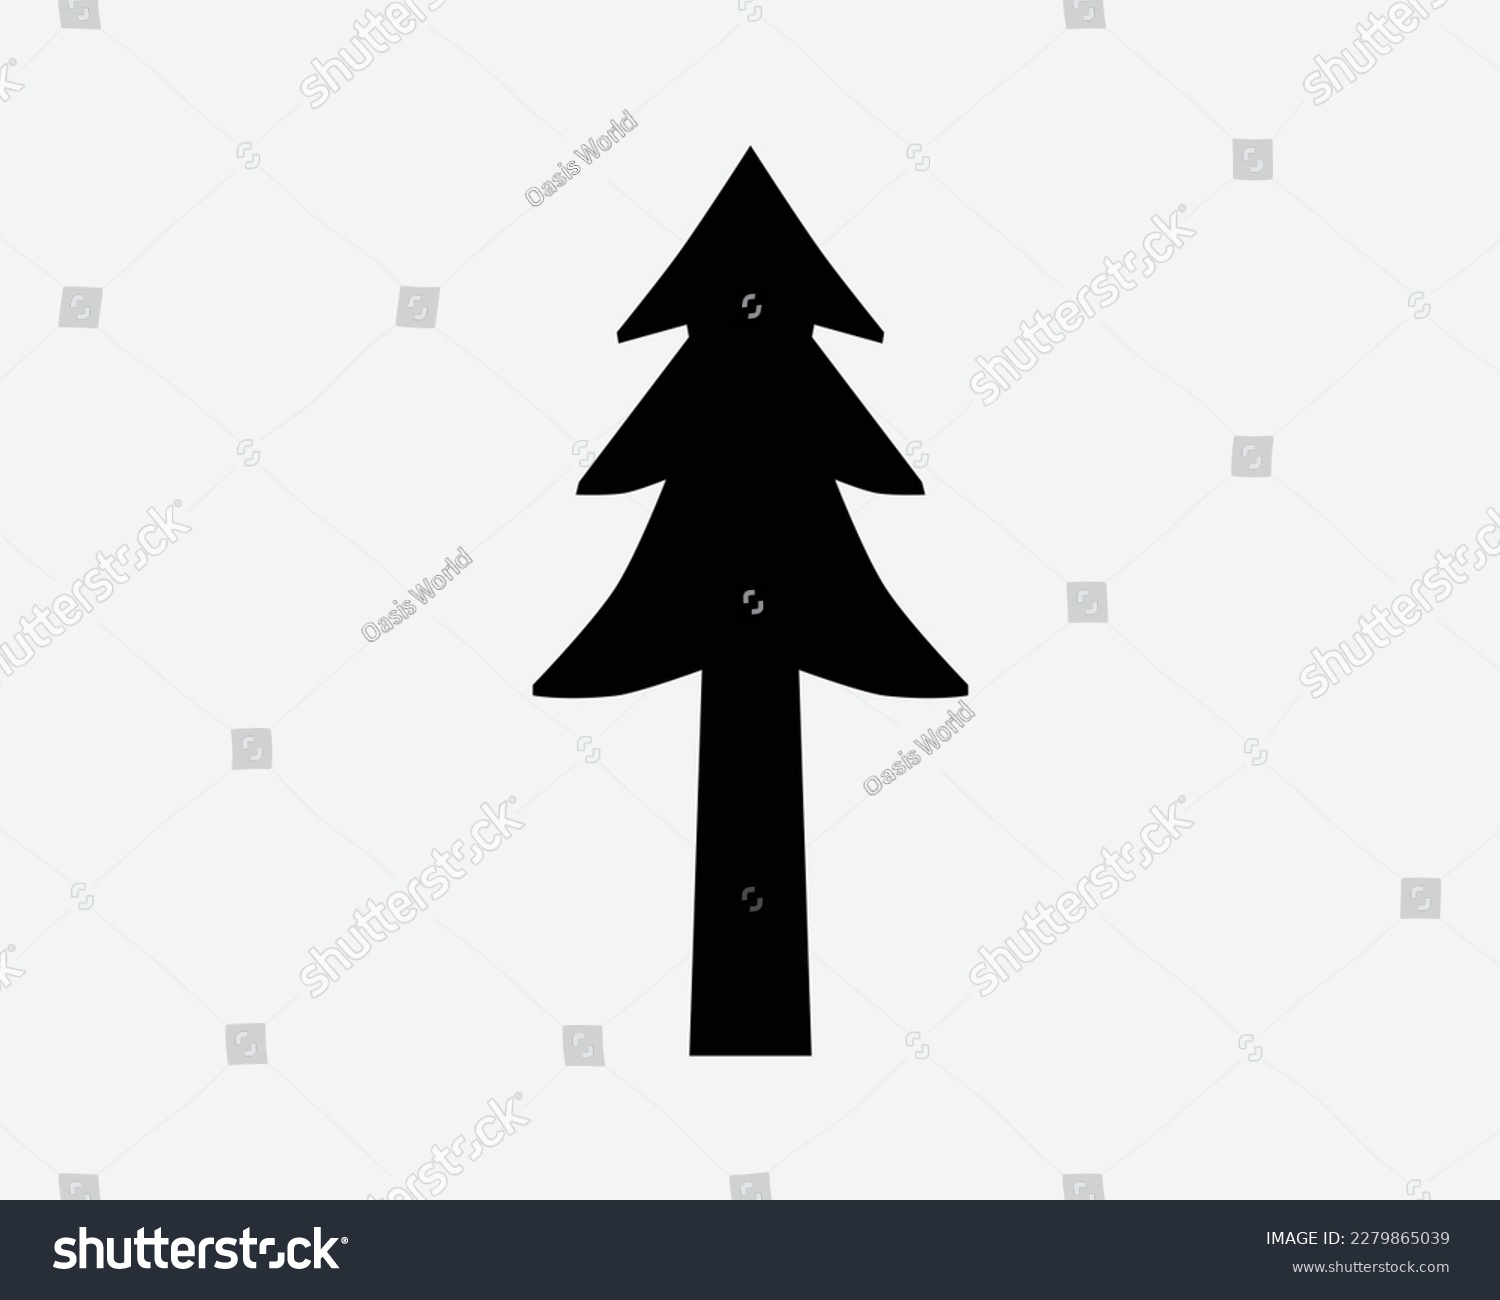 SVG of Pine Tree Icon Simple Cutout Christmas Nature Forest Plant Vector Black White Silhouette Symbol Sign Graphic Clipart Artwork Illustration Pictogram svg